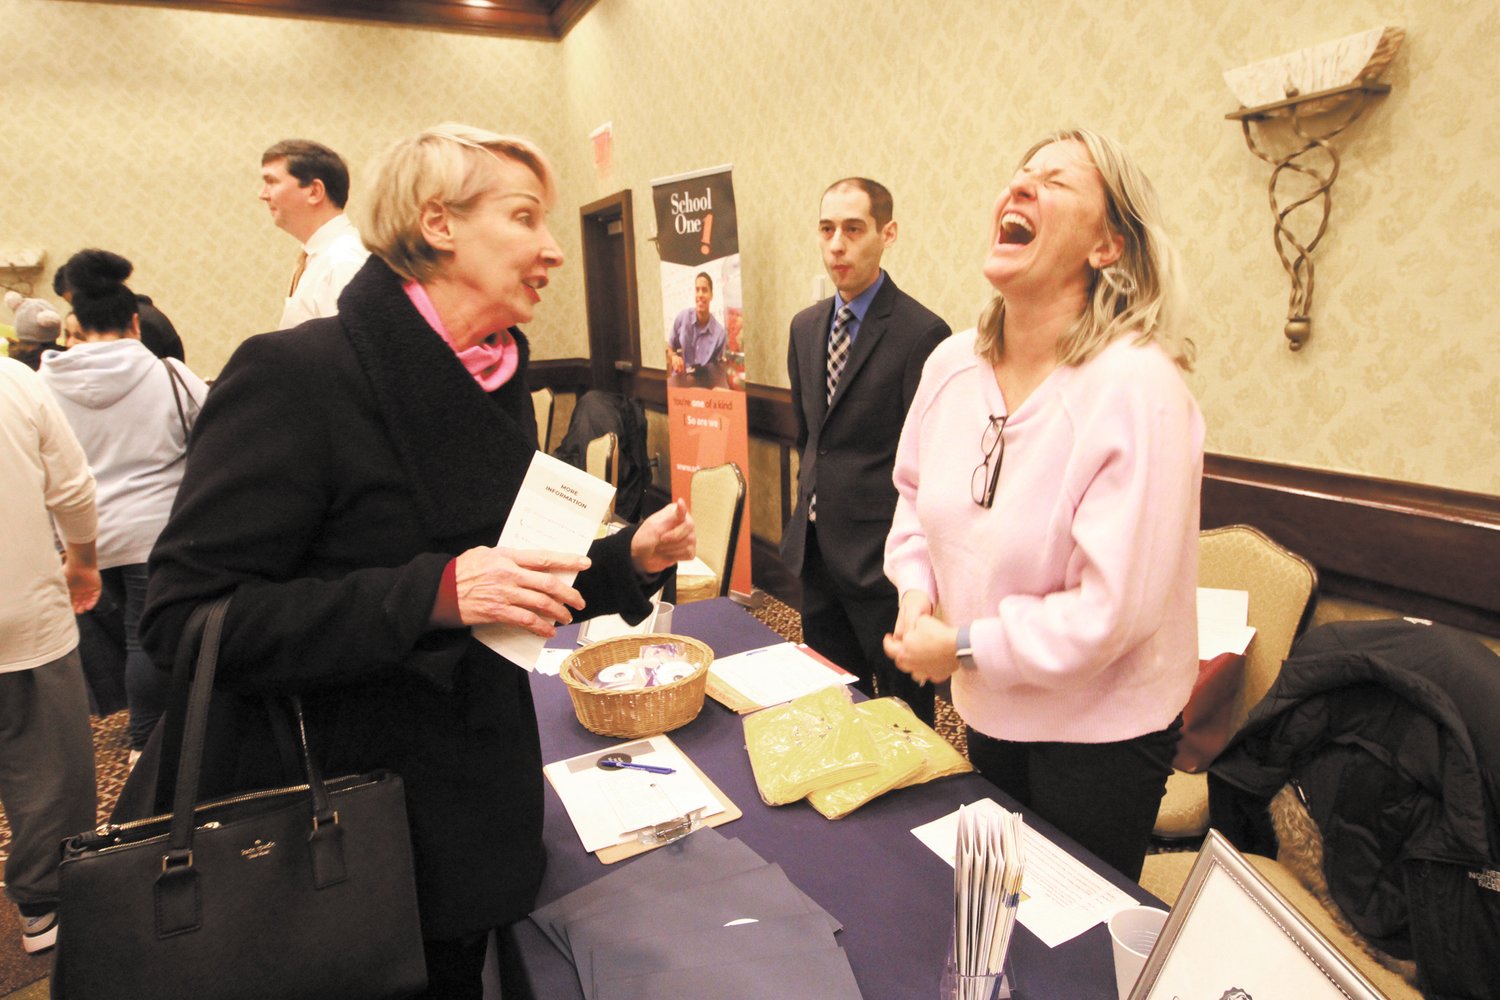 SHARING A LAUGH: Megan Reilly, a member of the group planning to open the state’s newest Catholic high school – Chesterton Academy on Jefferson Boulevard in Warwick, shares a laugh with one of those attending Sunday’s school choice fair. The academy that has a core group of twelve 9th and 10th graders, plans to open this fall.